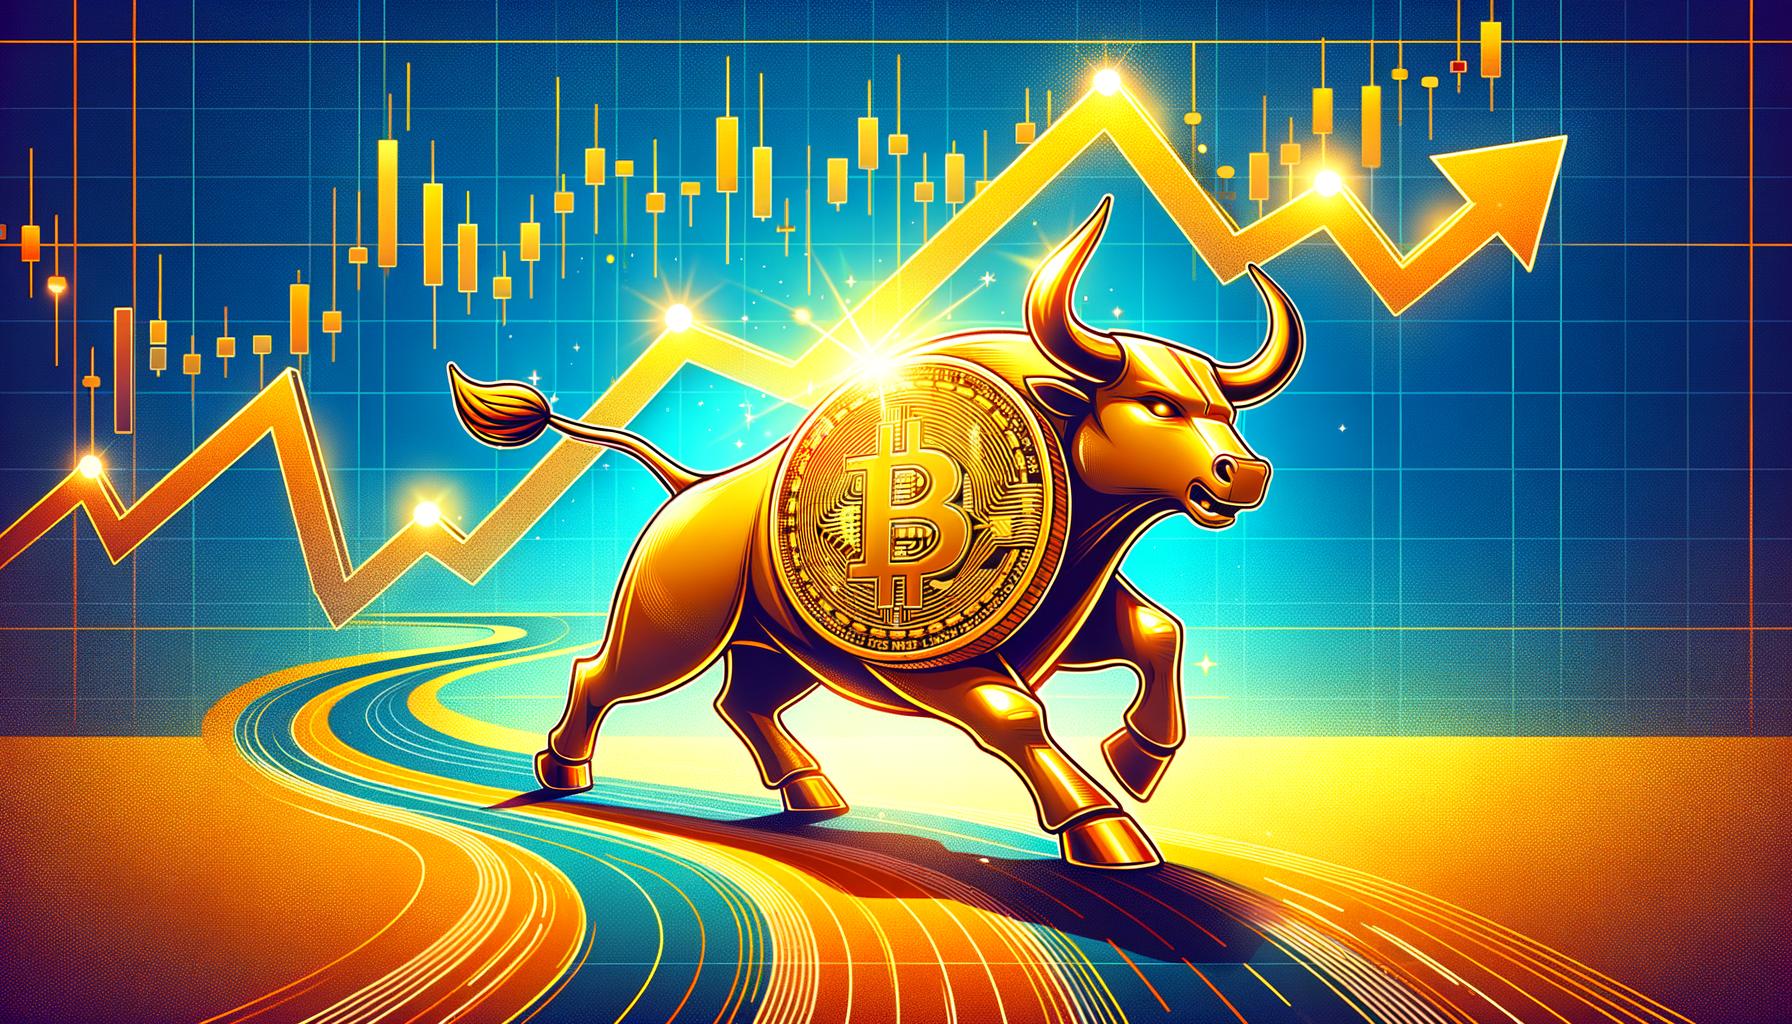 Bitcoin Price Recovers Lost Ground: Is the Bull Run Back?